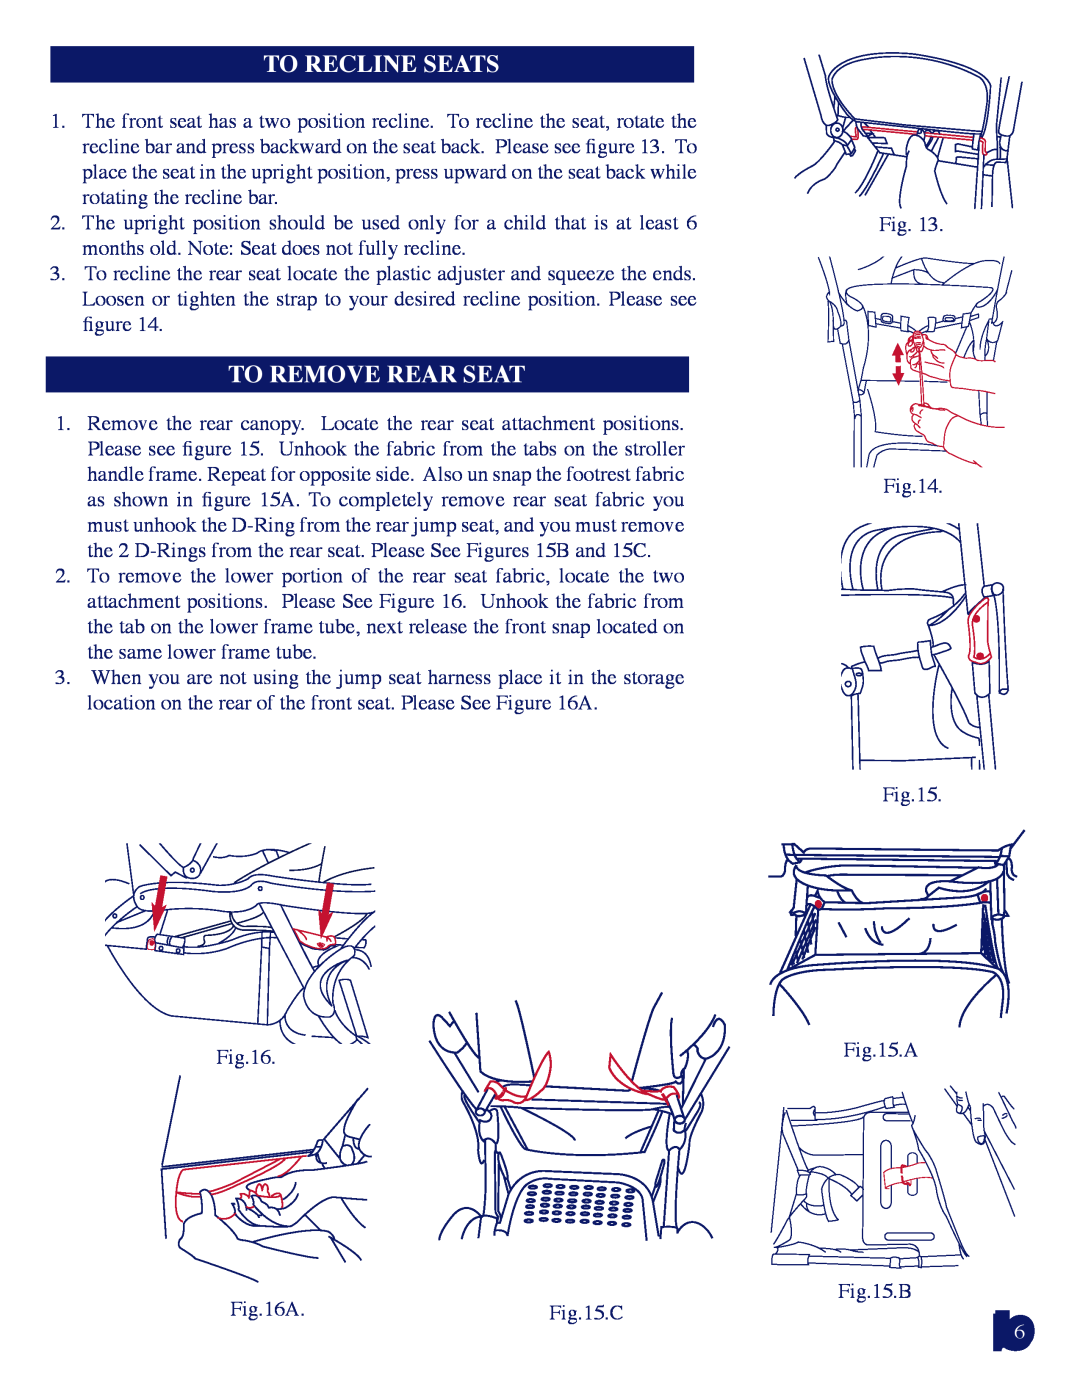 Baby Trend 7581 manual To Recline Seats Seatback Positioning, To Remove Rear Seat 